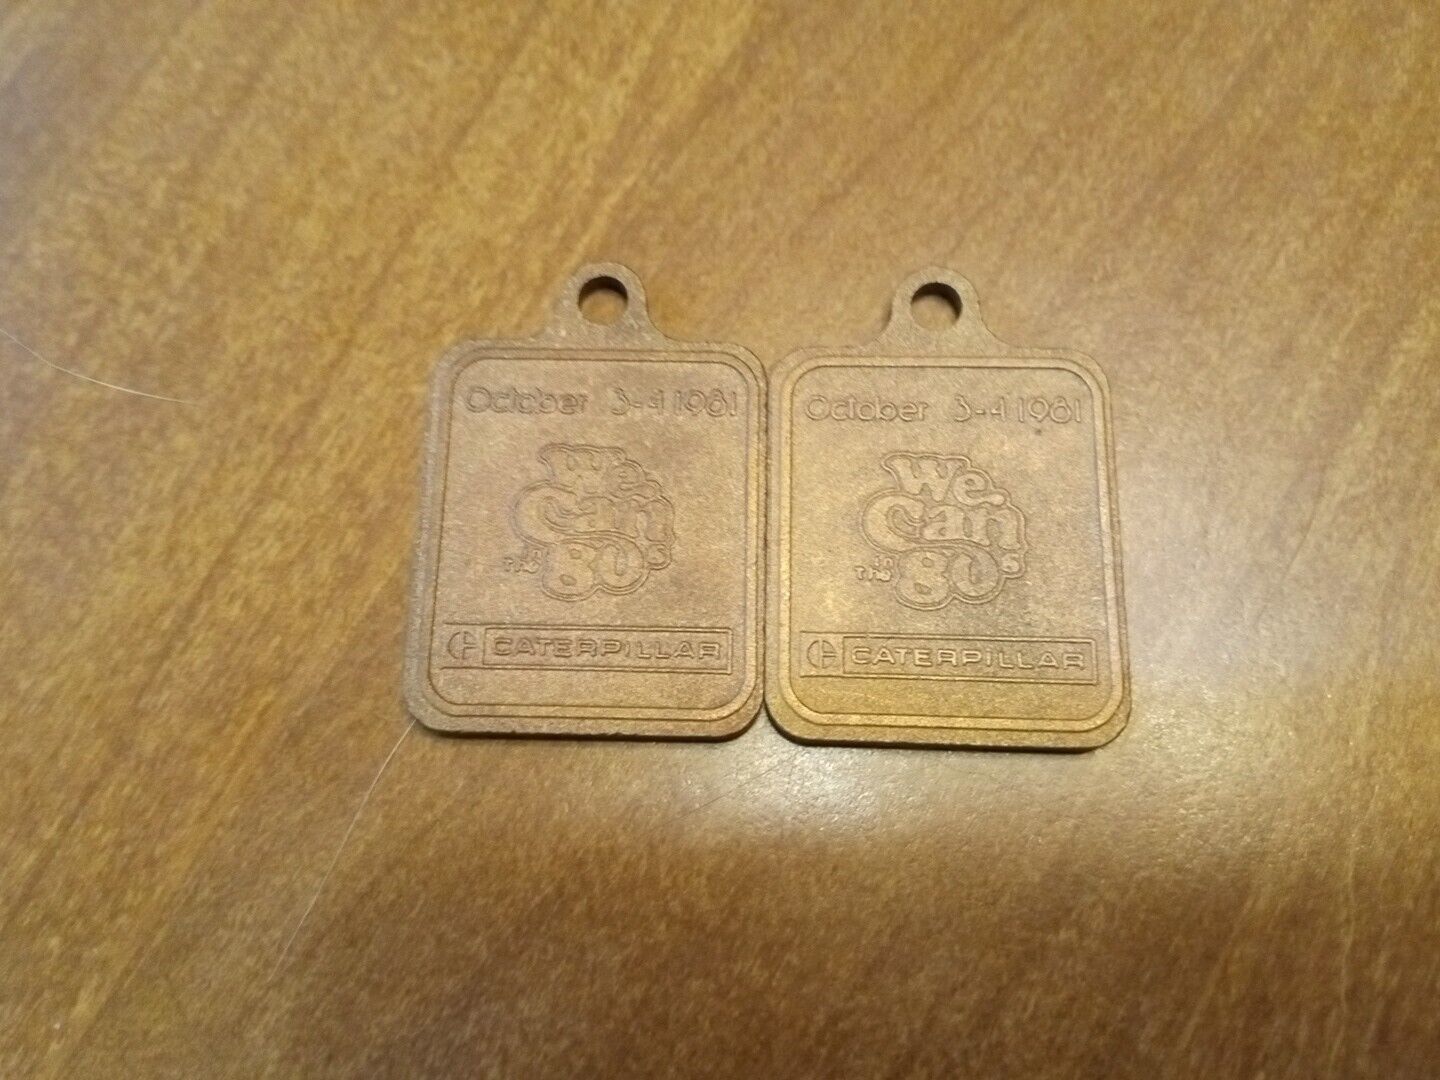 Vintage 1980s Caterpillar Open House Key Fobs Lot Of 2 Great Condition Rare Htf